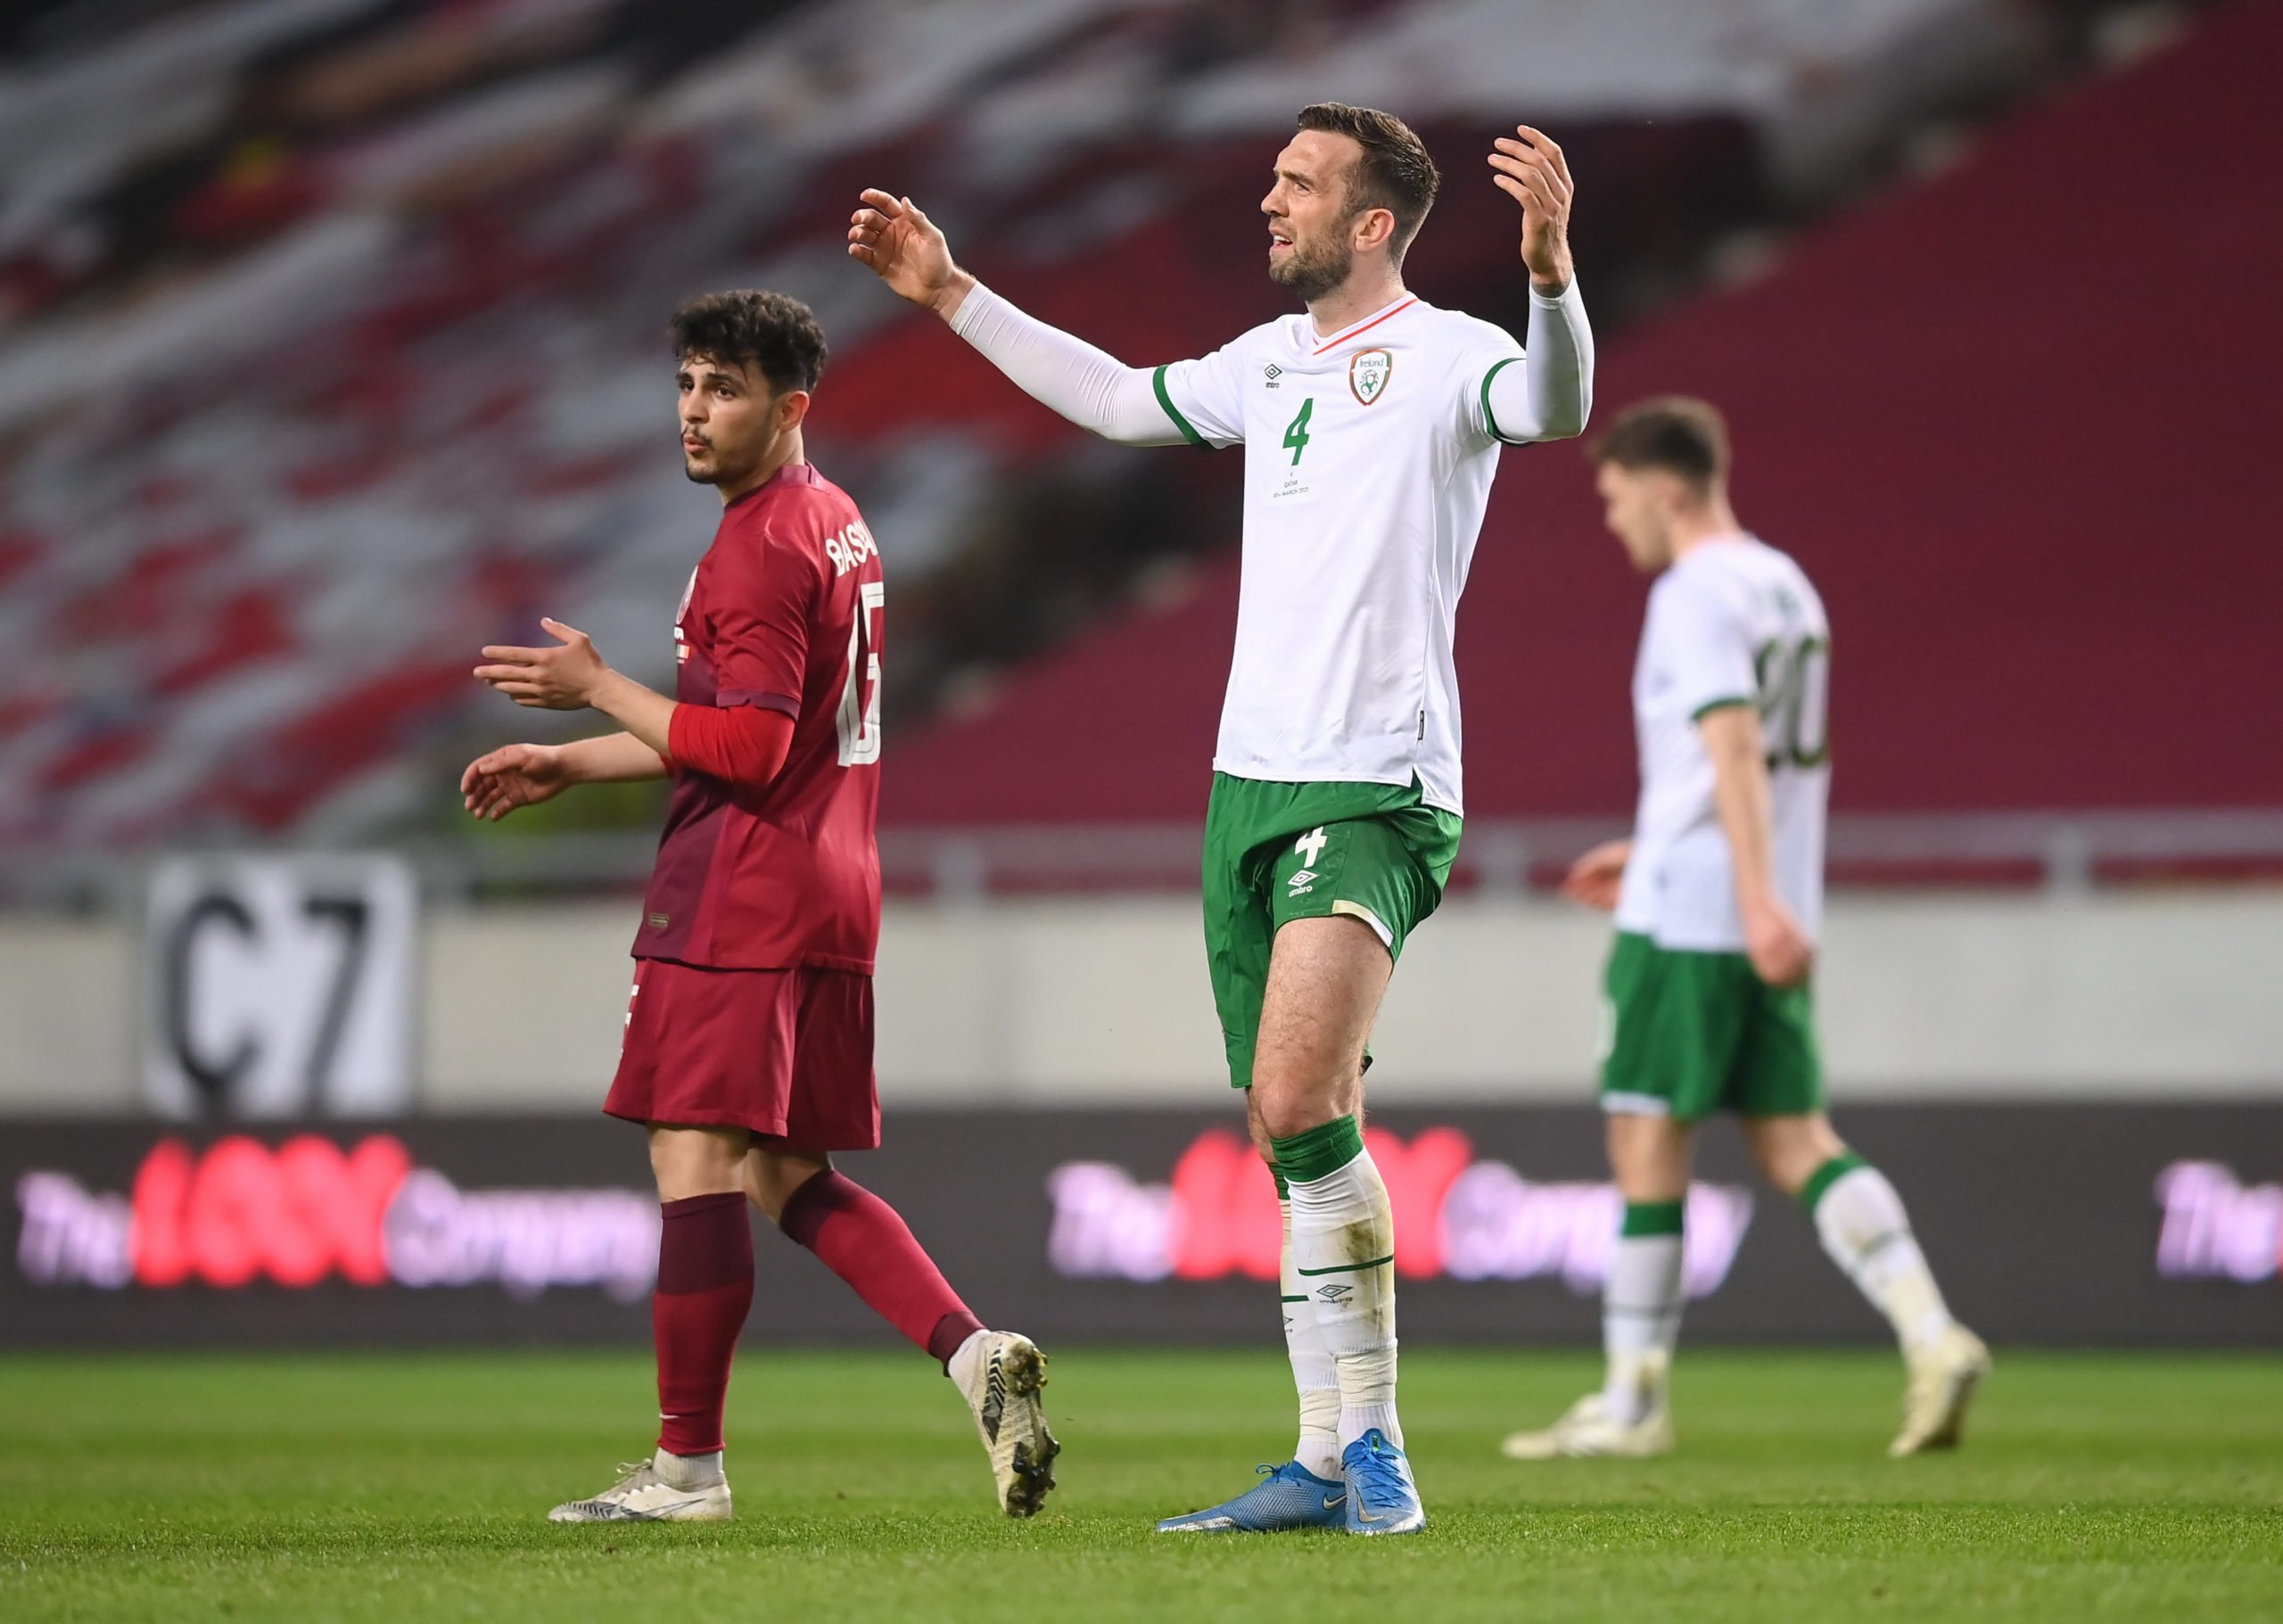 Shane Duffy's disappointing night, and why Keane is better for Ireland than Celtic